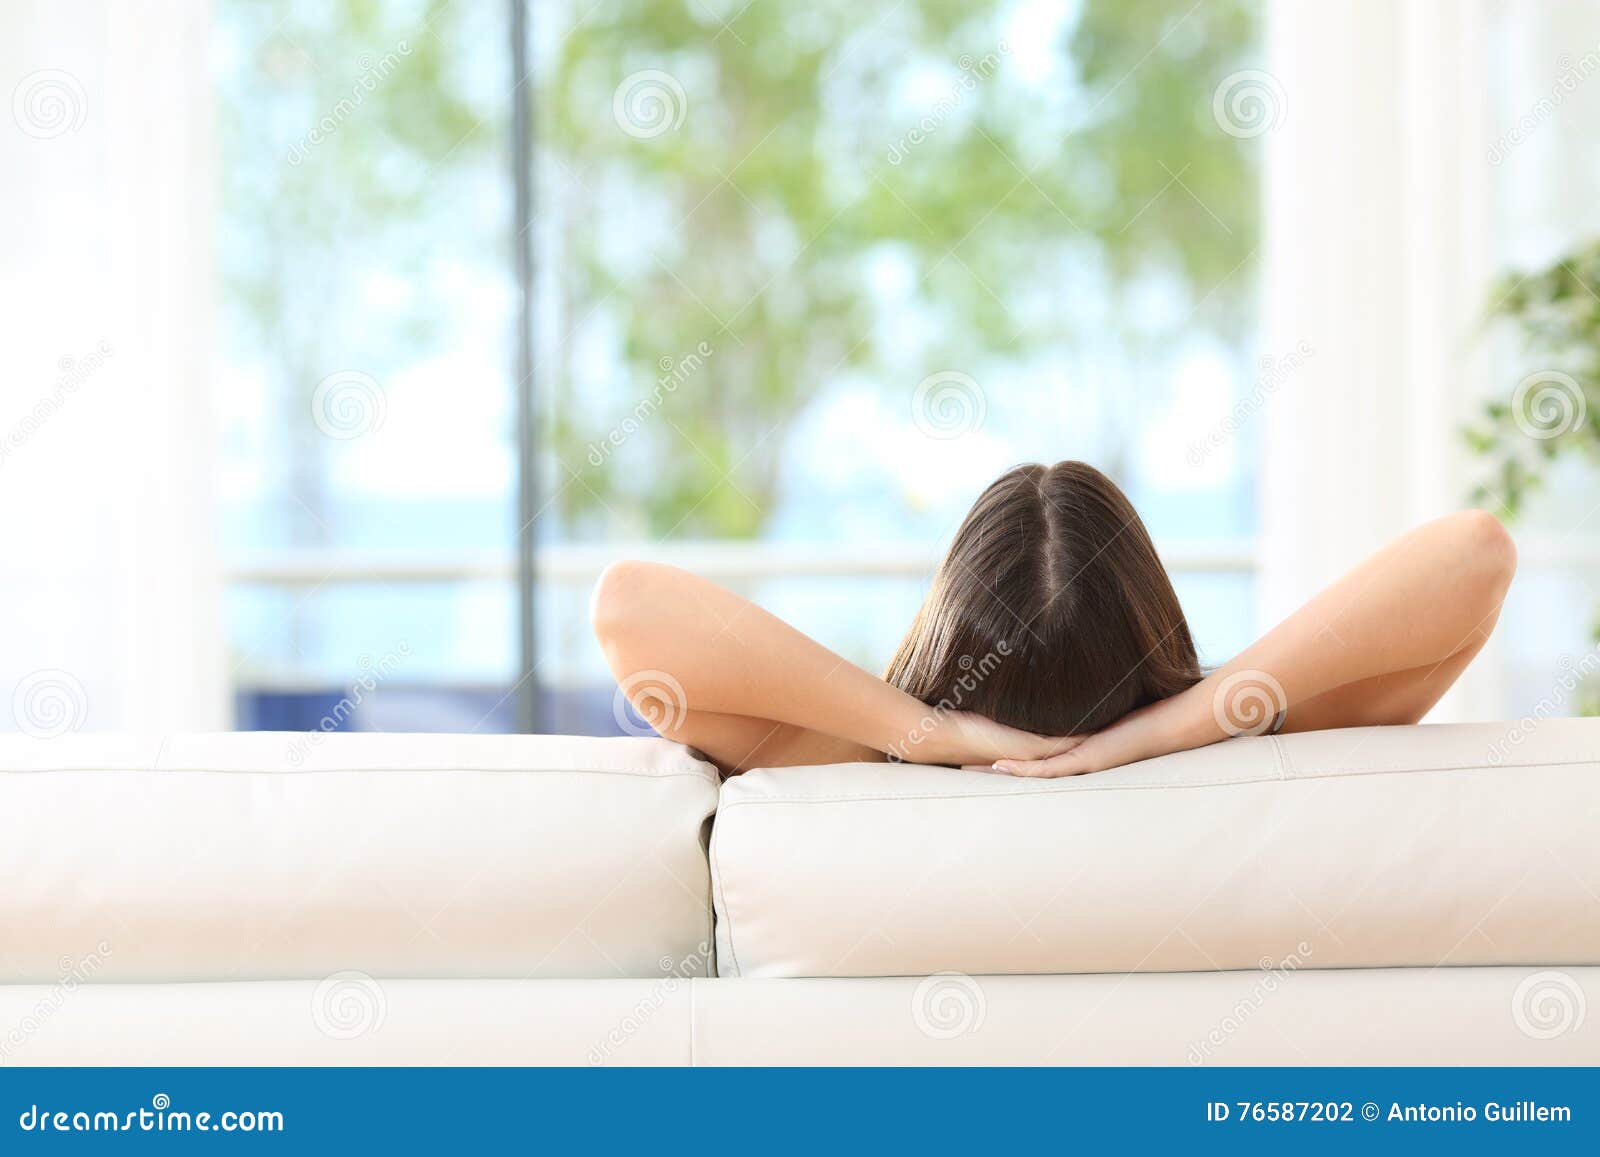 woman relaxing on a couch at home